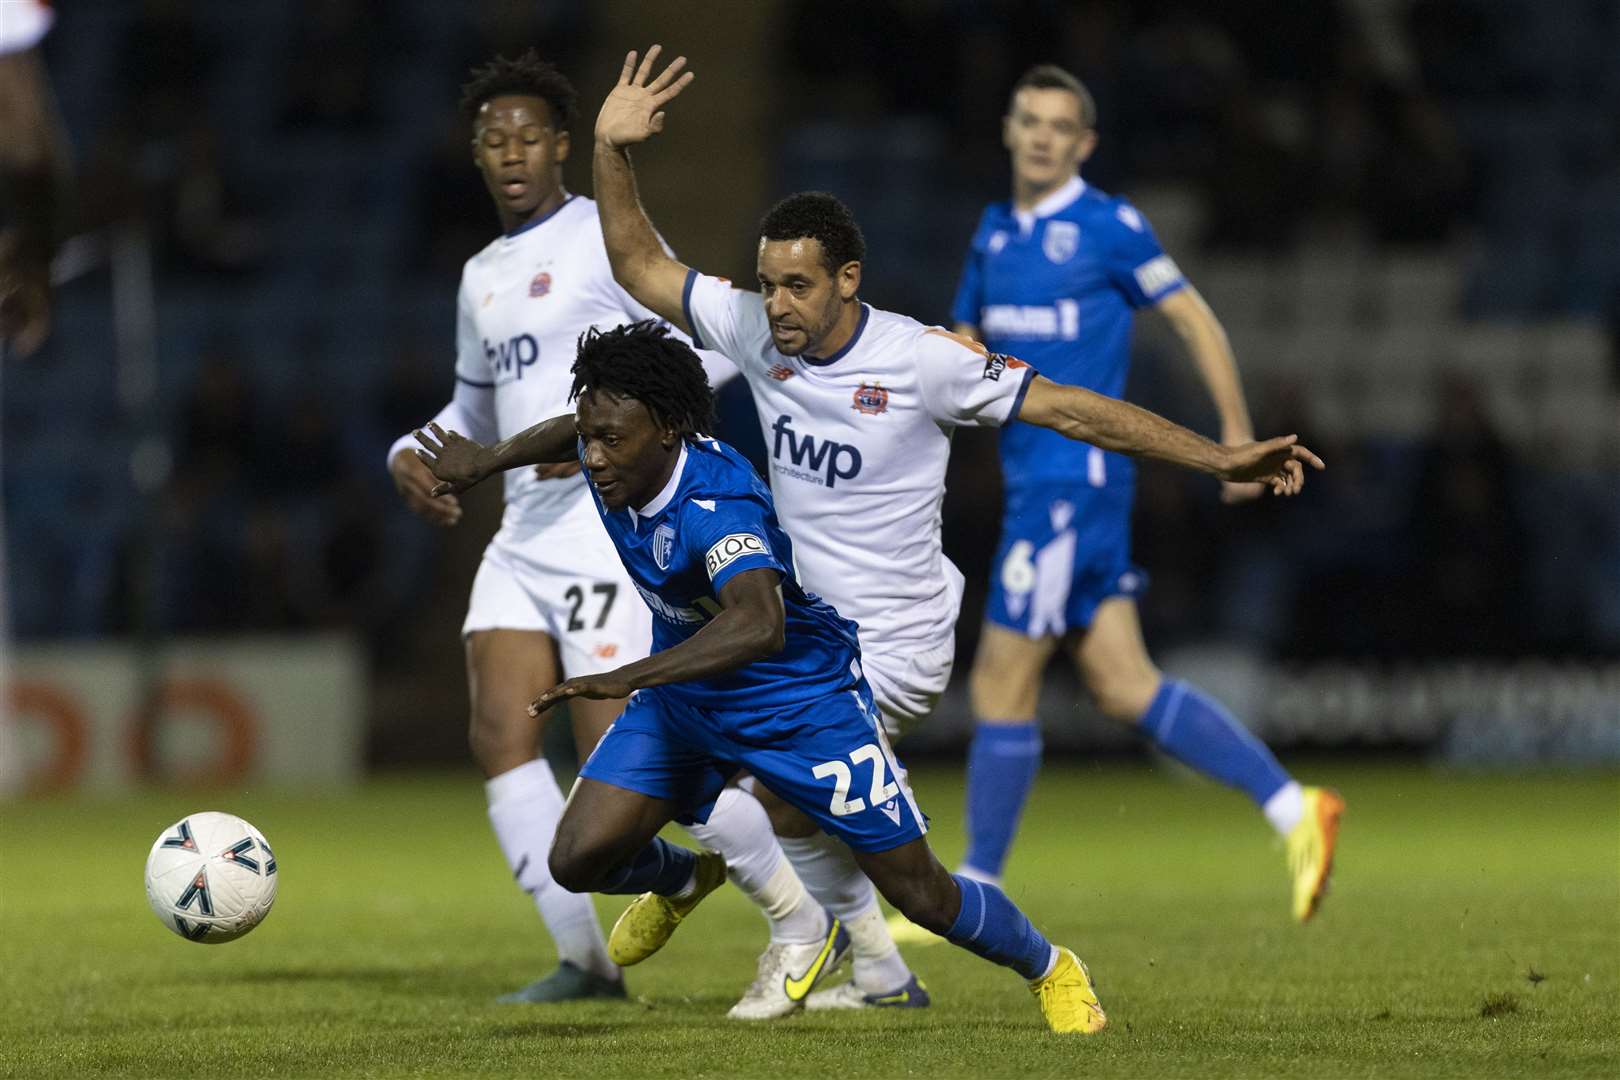 Jordan Green in action for Gillingham in the FA Cup against AFC Fylde. Manager Neil Harris says he won't play for him again